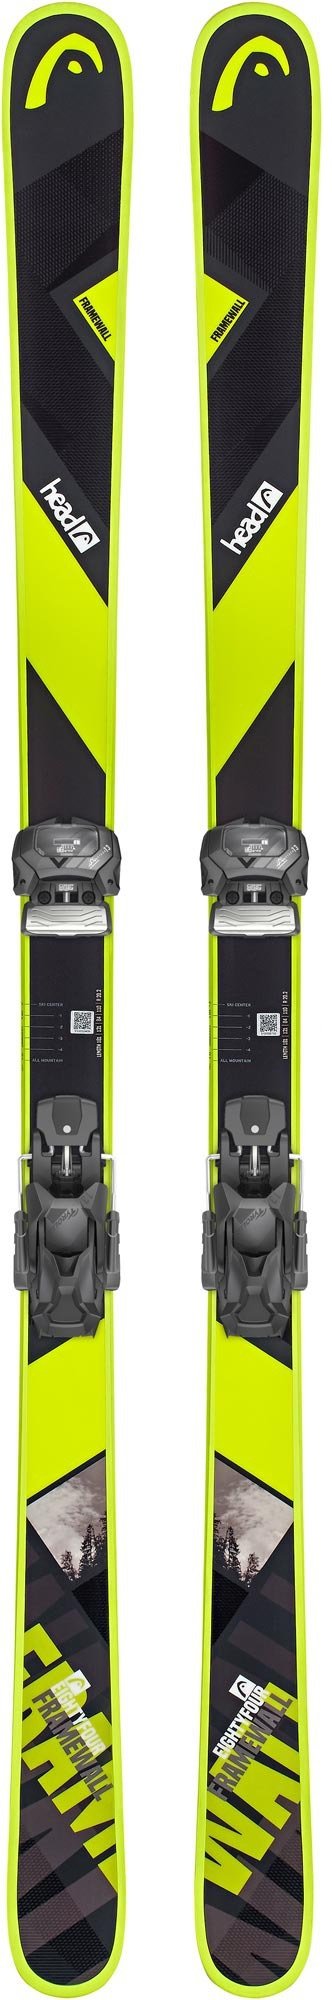 Head Frame Wall Ski with Attack2 13 GW Binding 2019